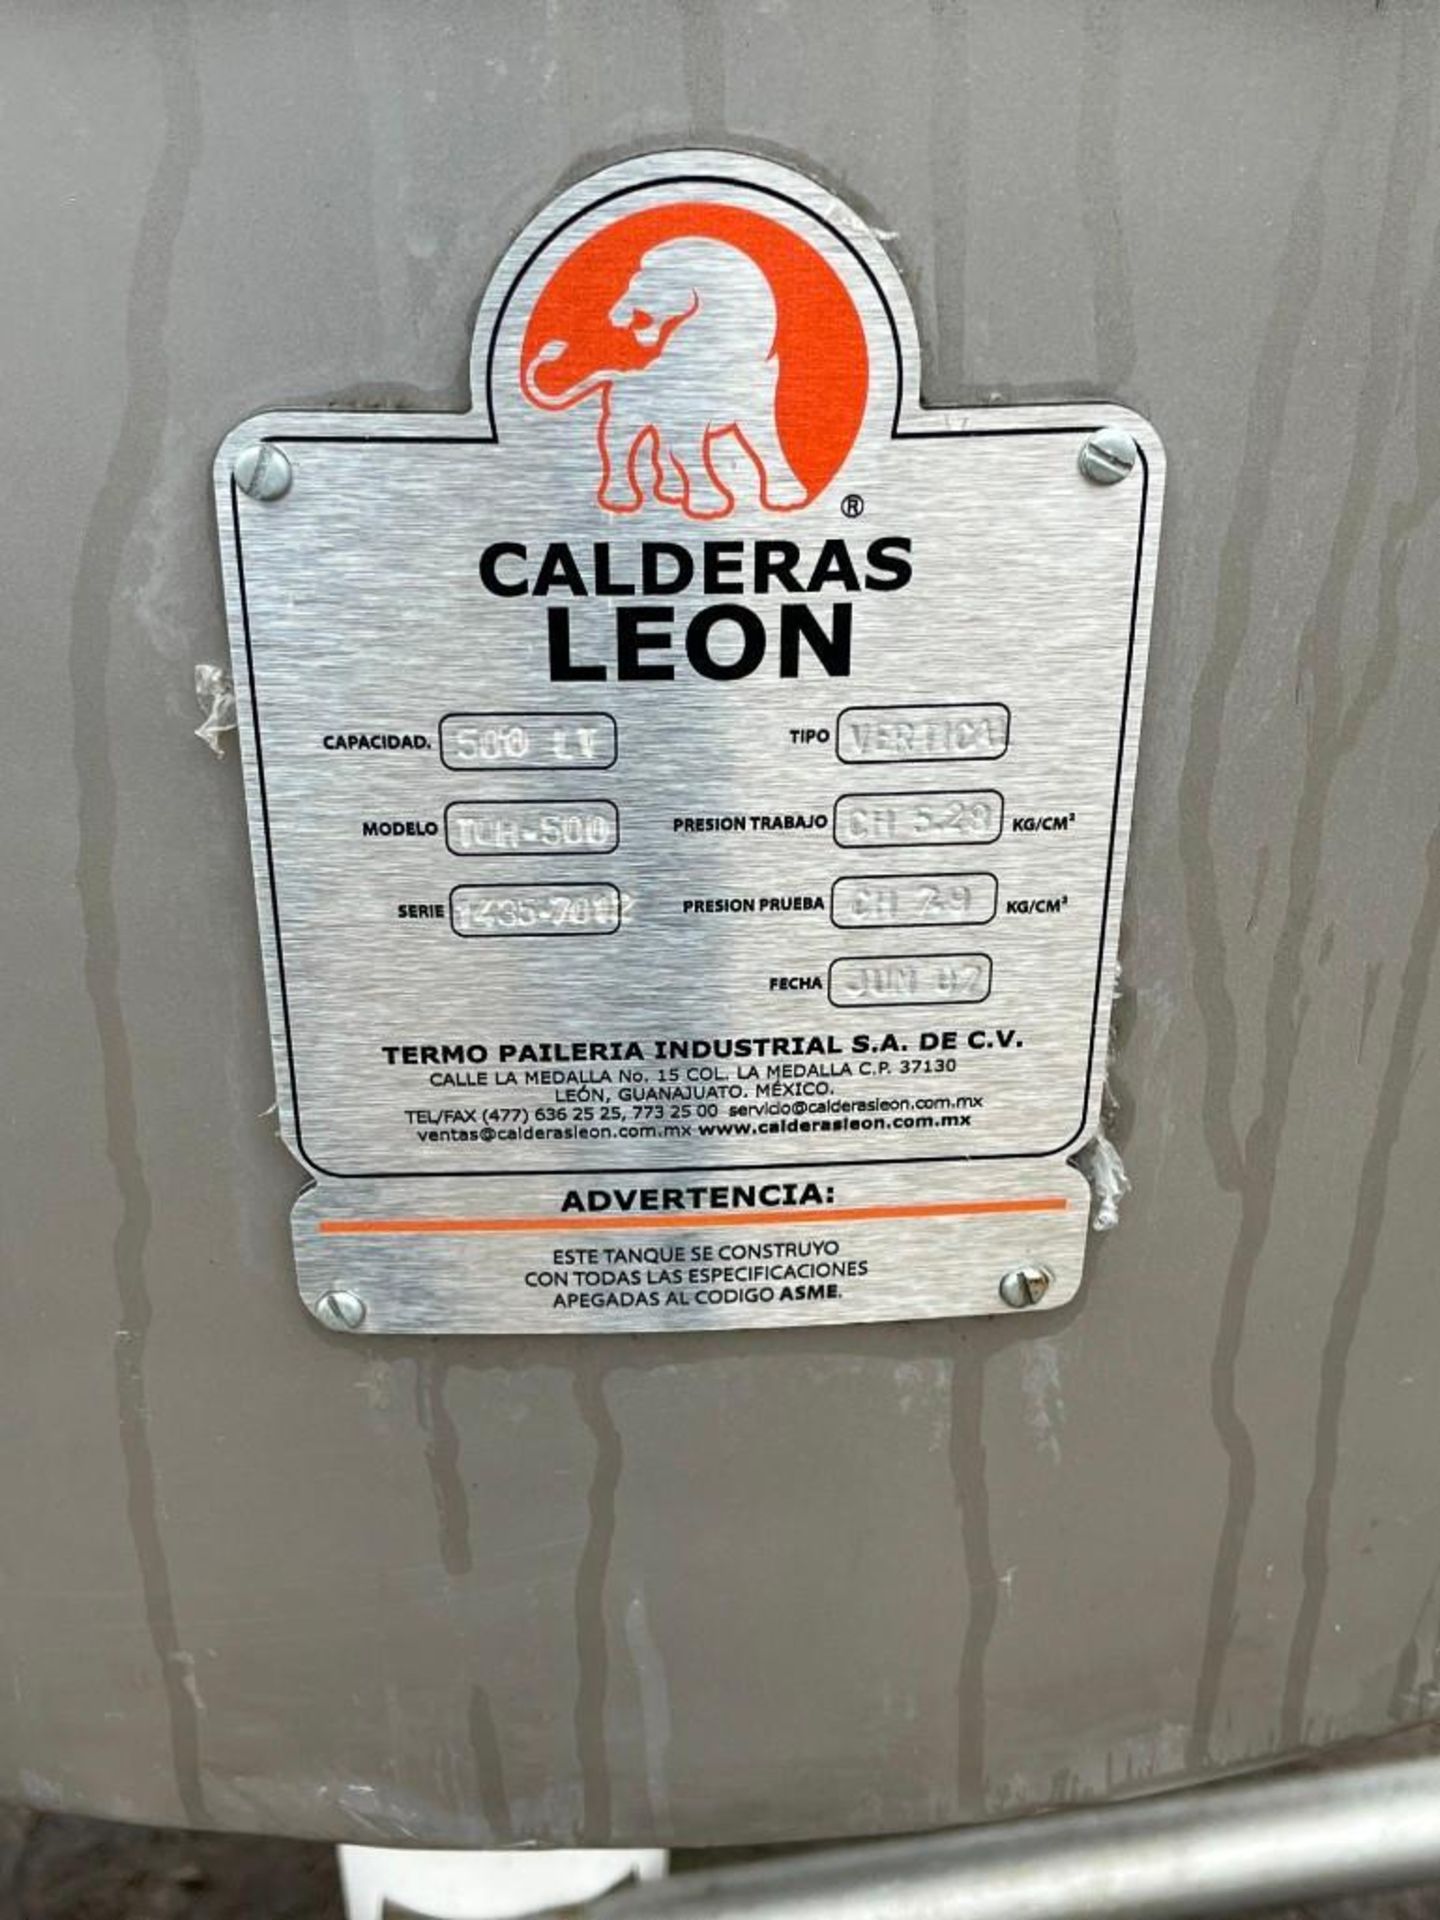 Caldera's Leon Stainless Steel Jacketed Tank, Model TQH-500, S/N: 1435-7012. Rated for up to 135 gal - Image 4 of 8